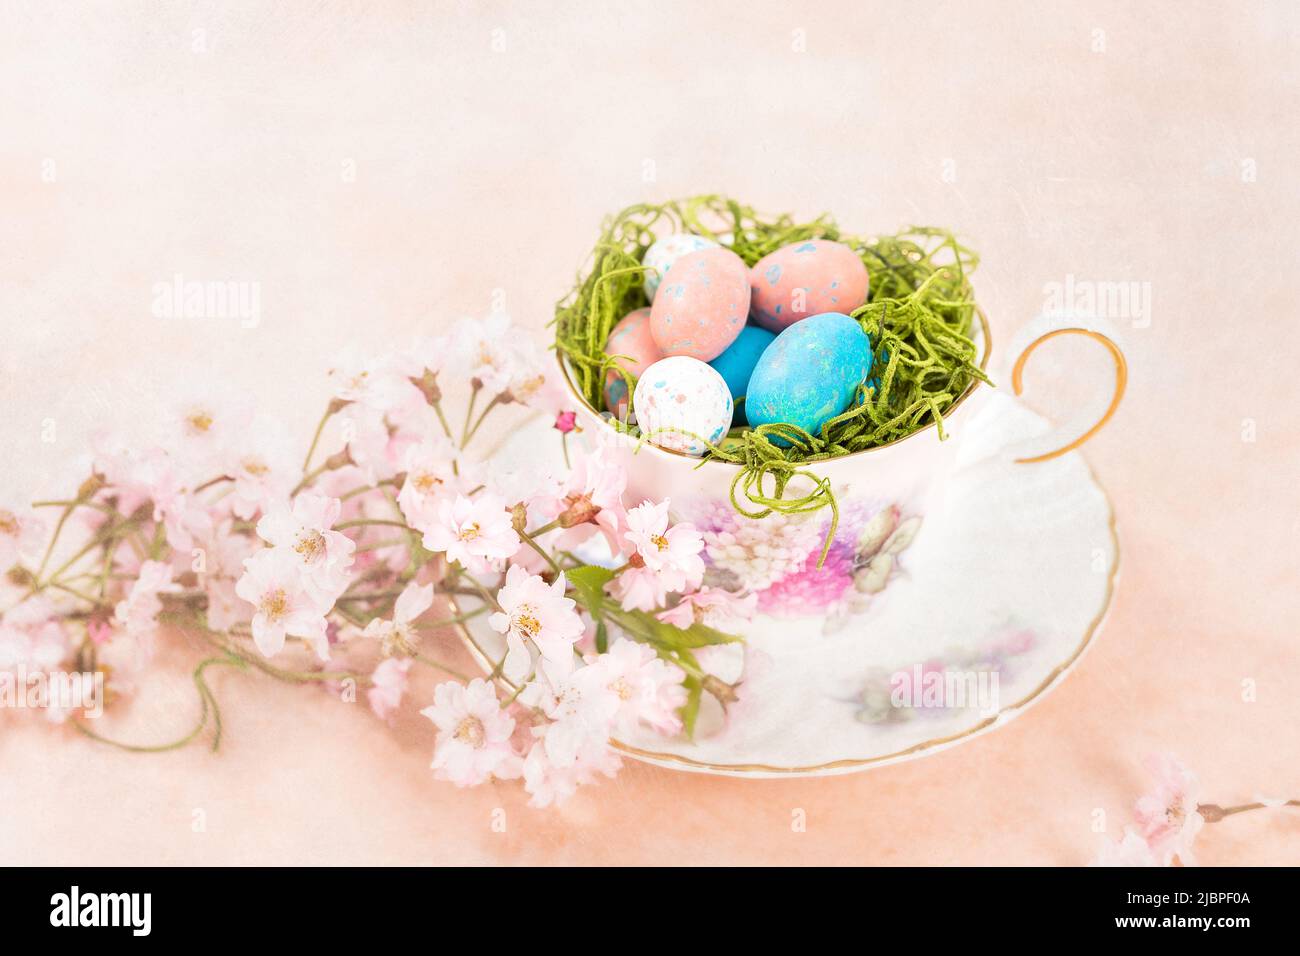 Pastel Easter Candy Displayed in a Vintage Cup and Saucer Stock Photo